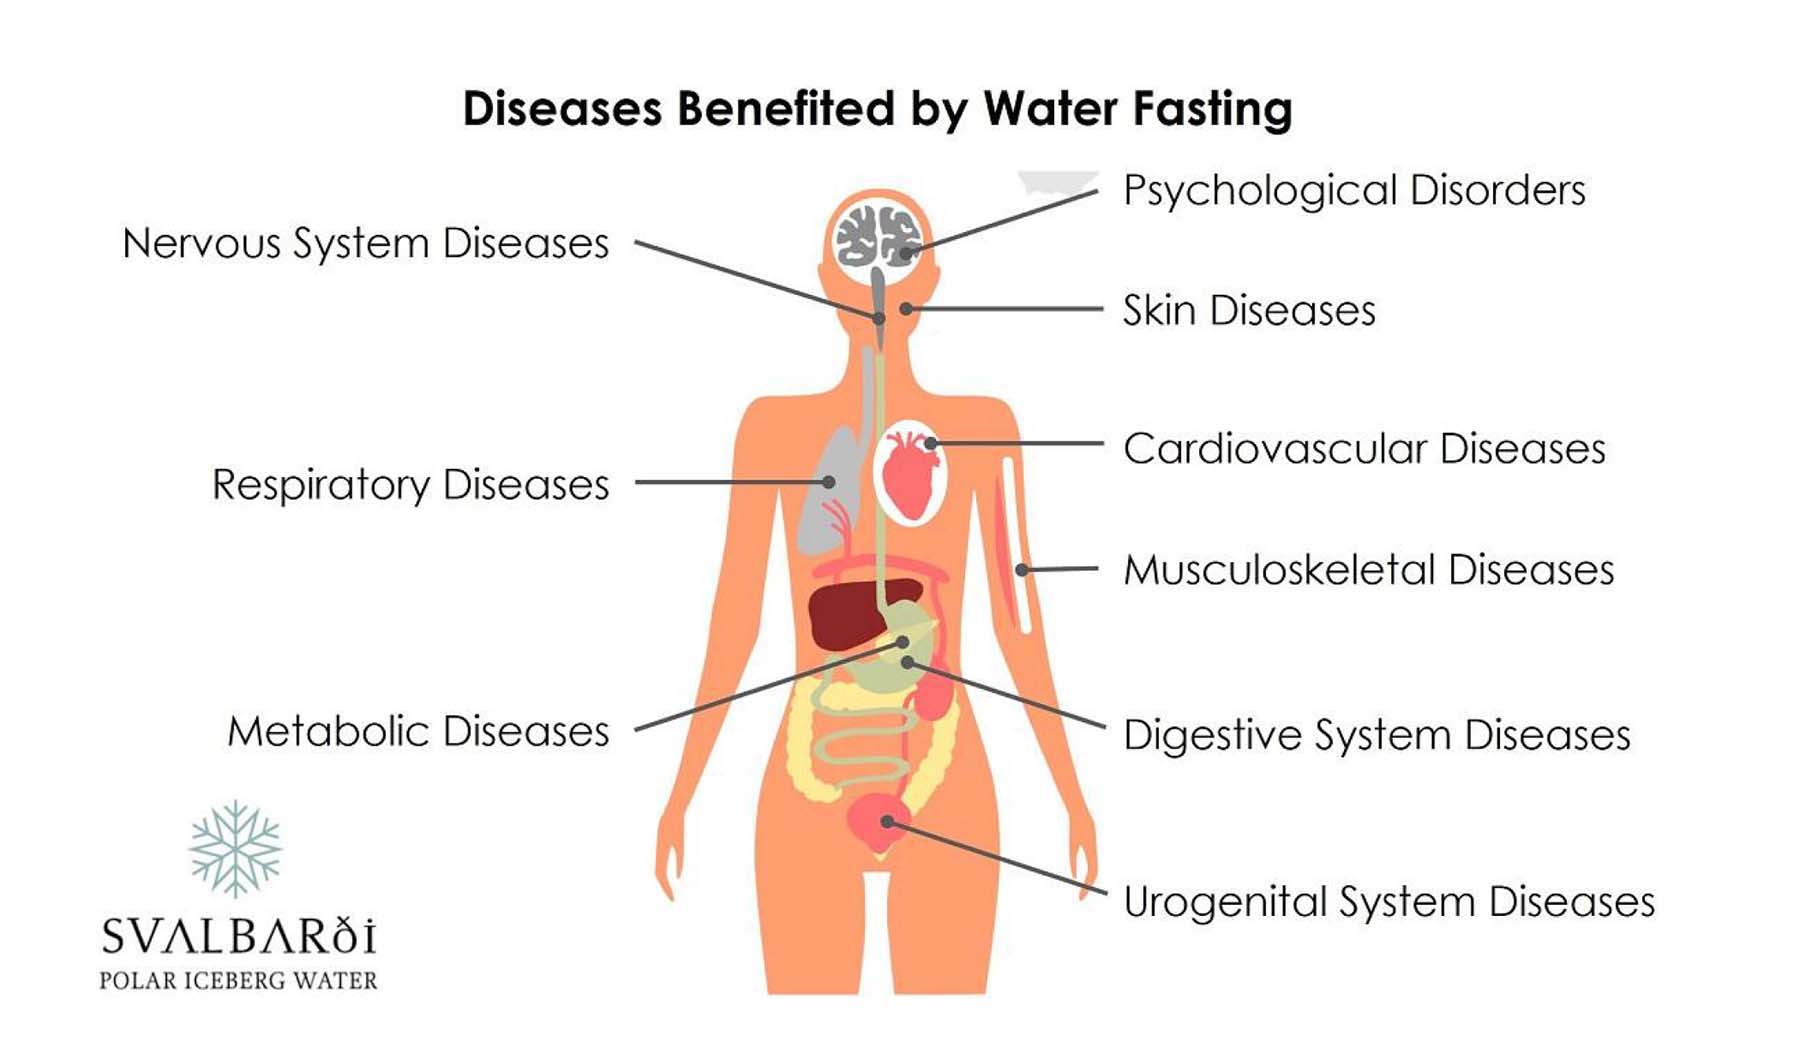 Diseases Benefited by Water Fasting